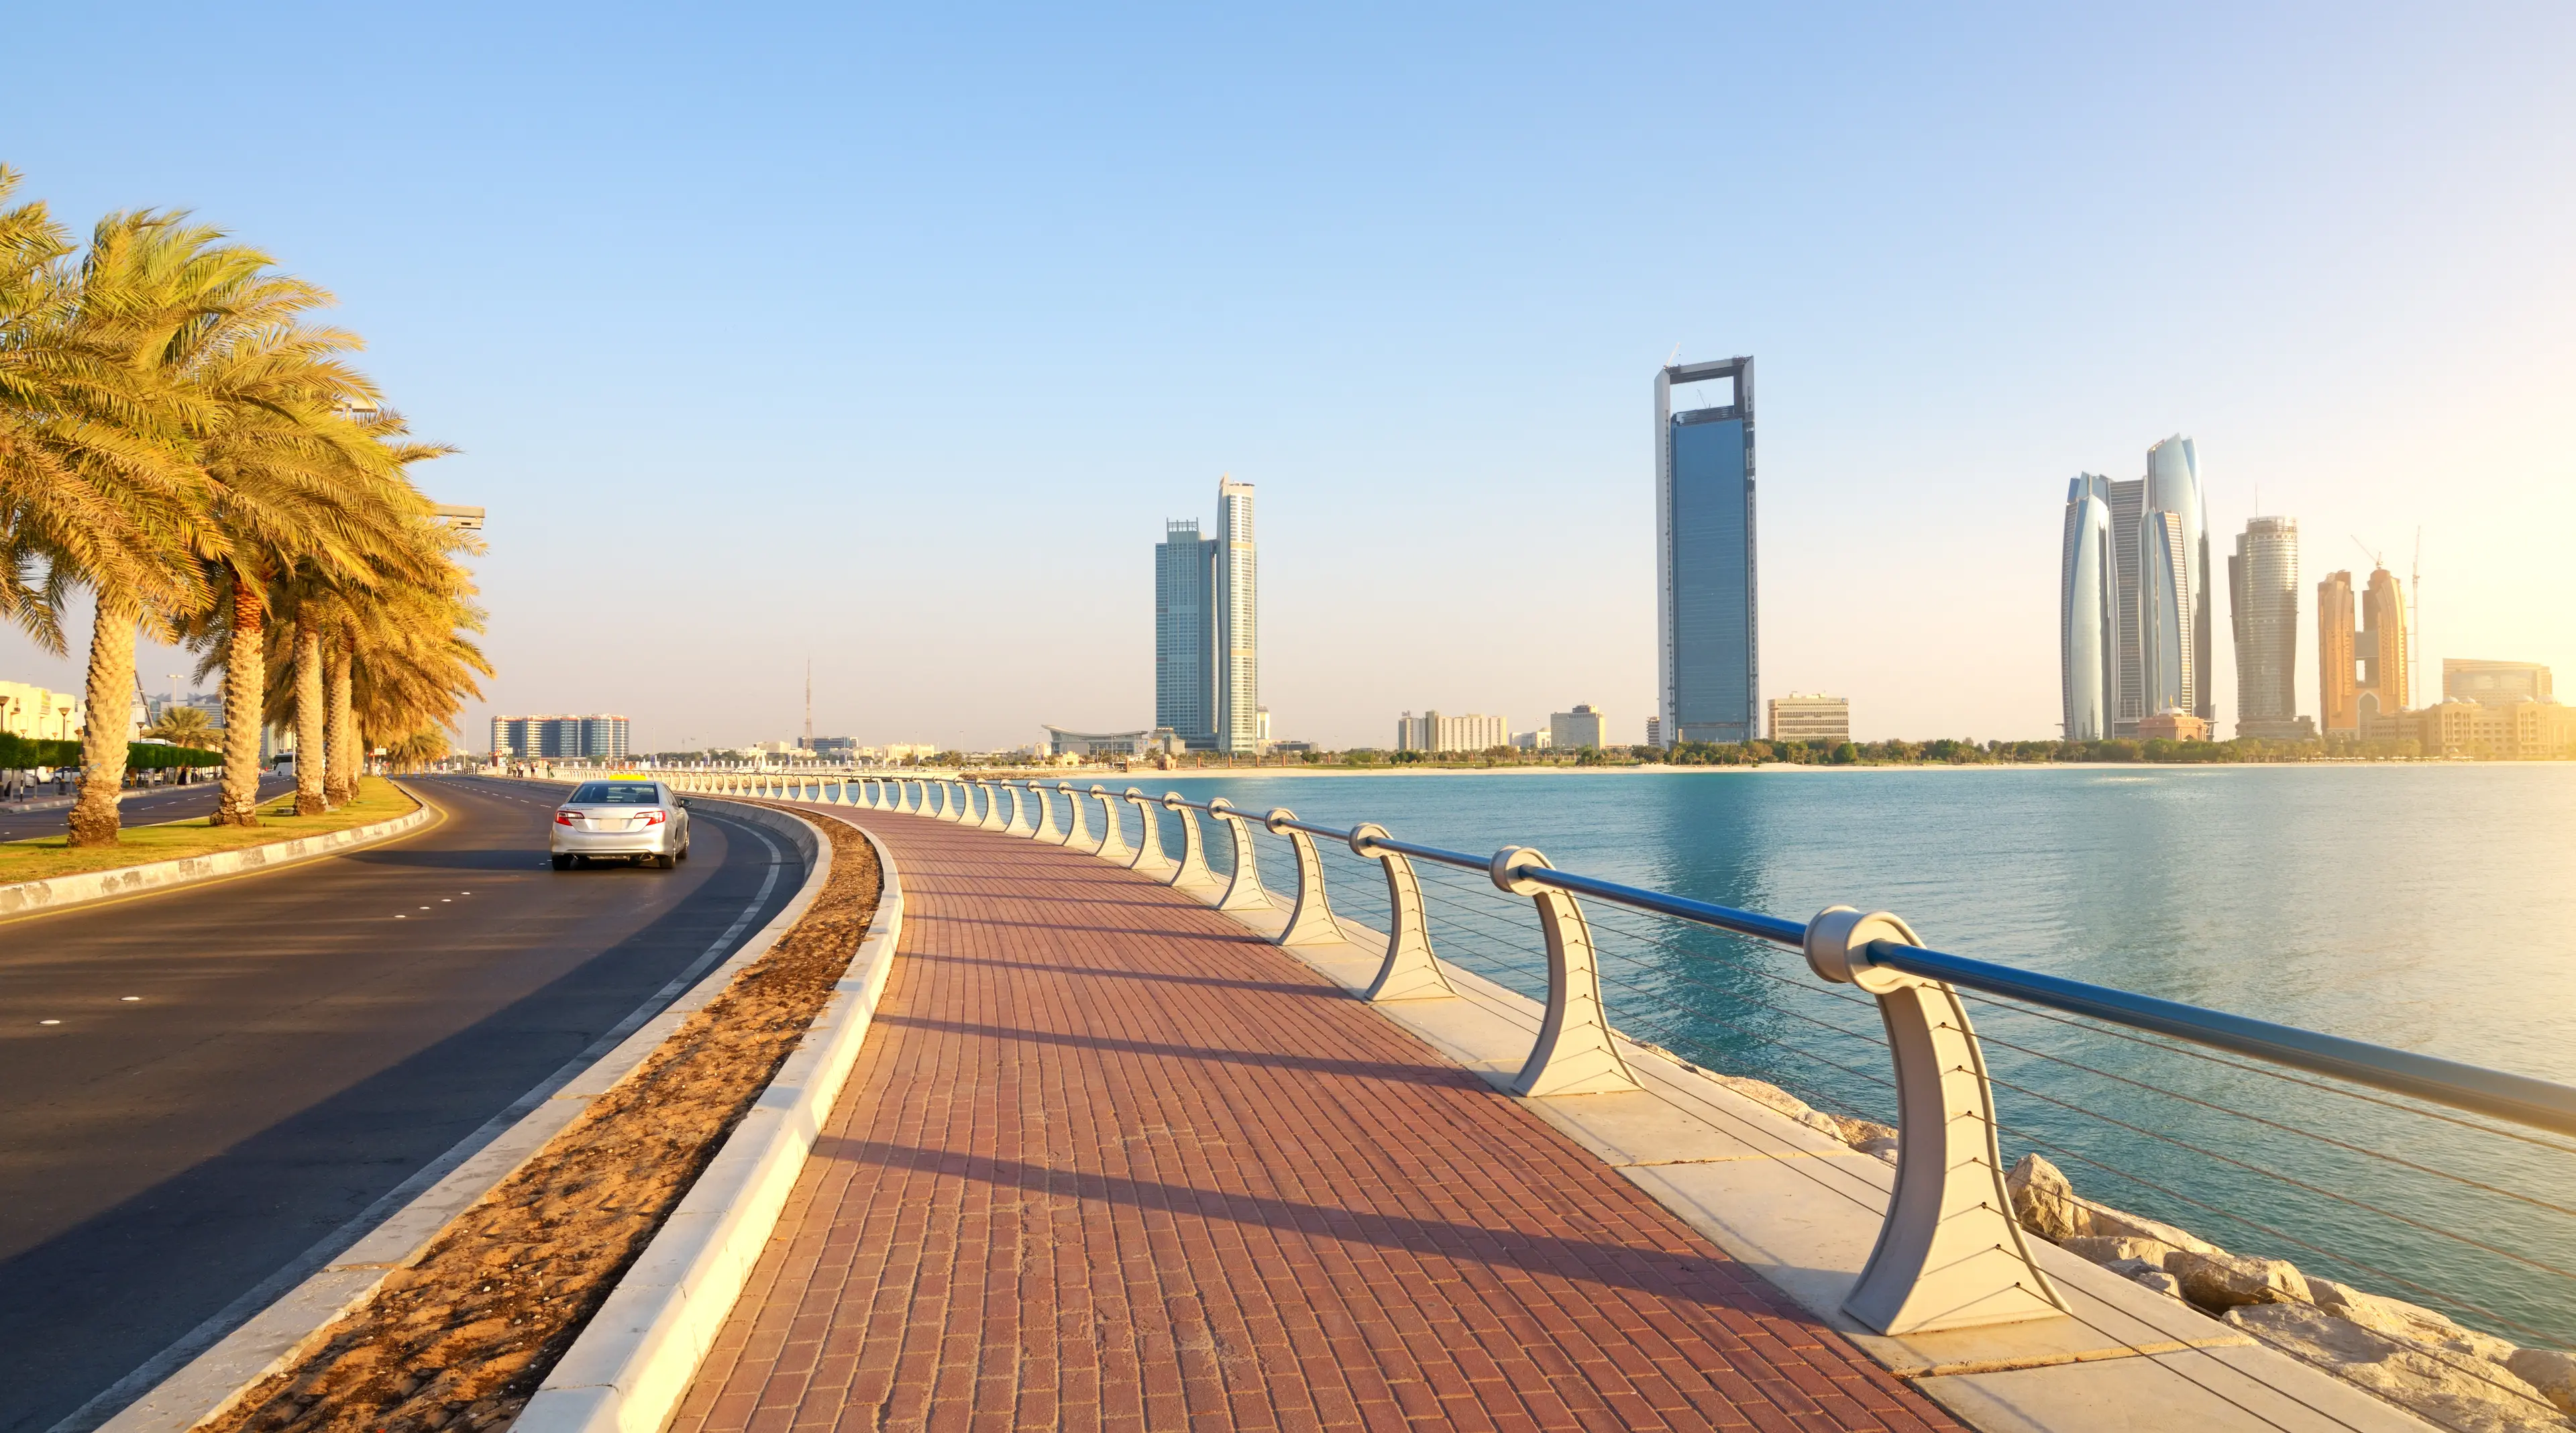 4-Day Local's Guide to Abu Dhabi: Outdoor Fun and Shopping